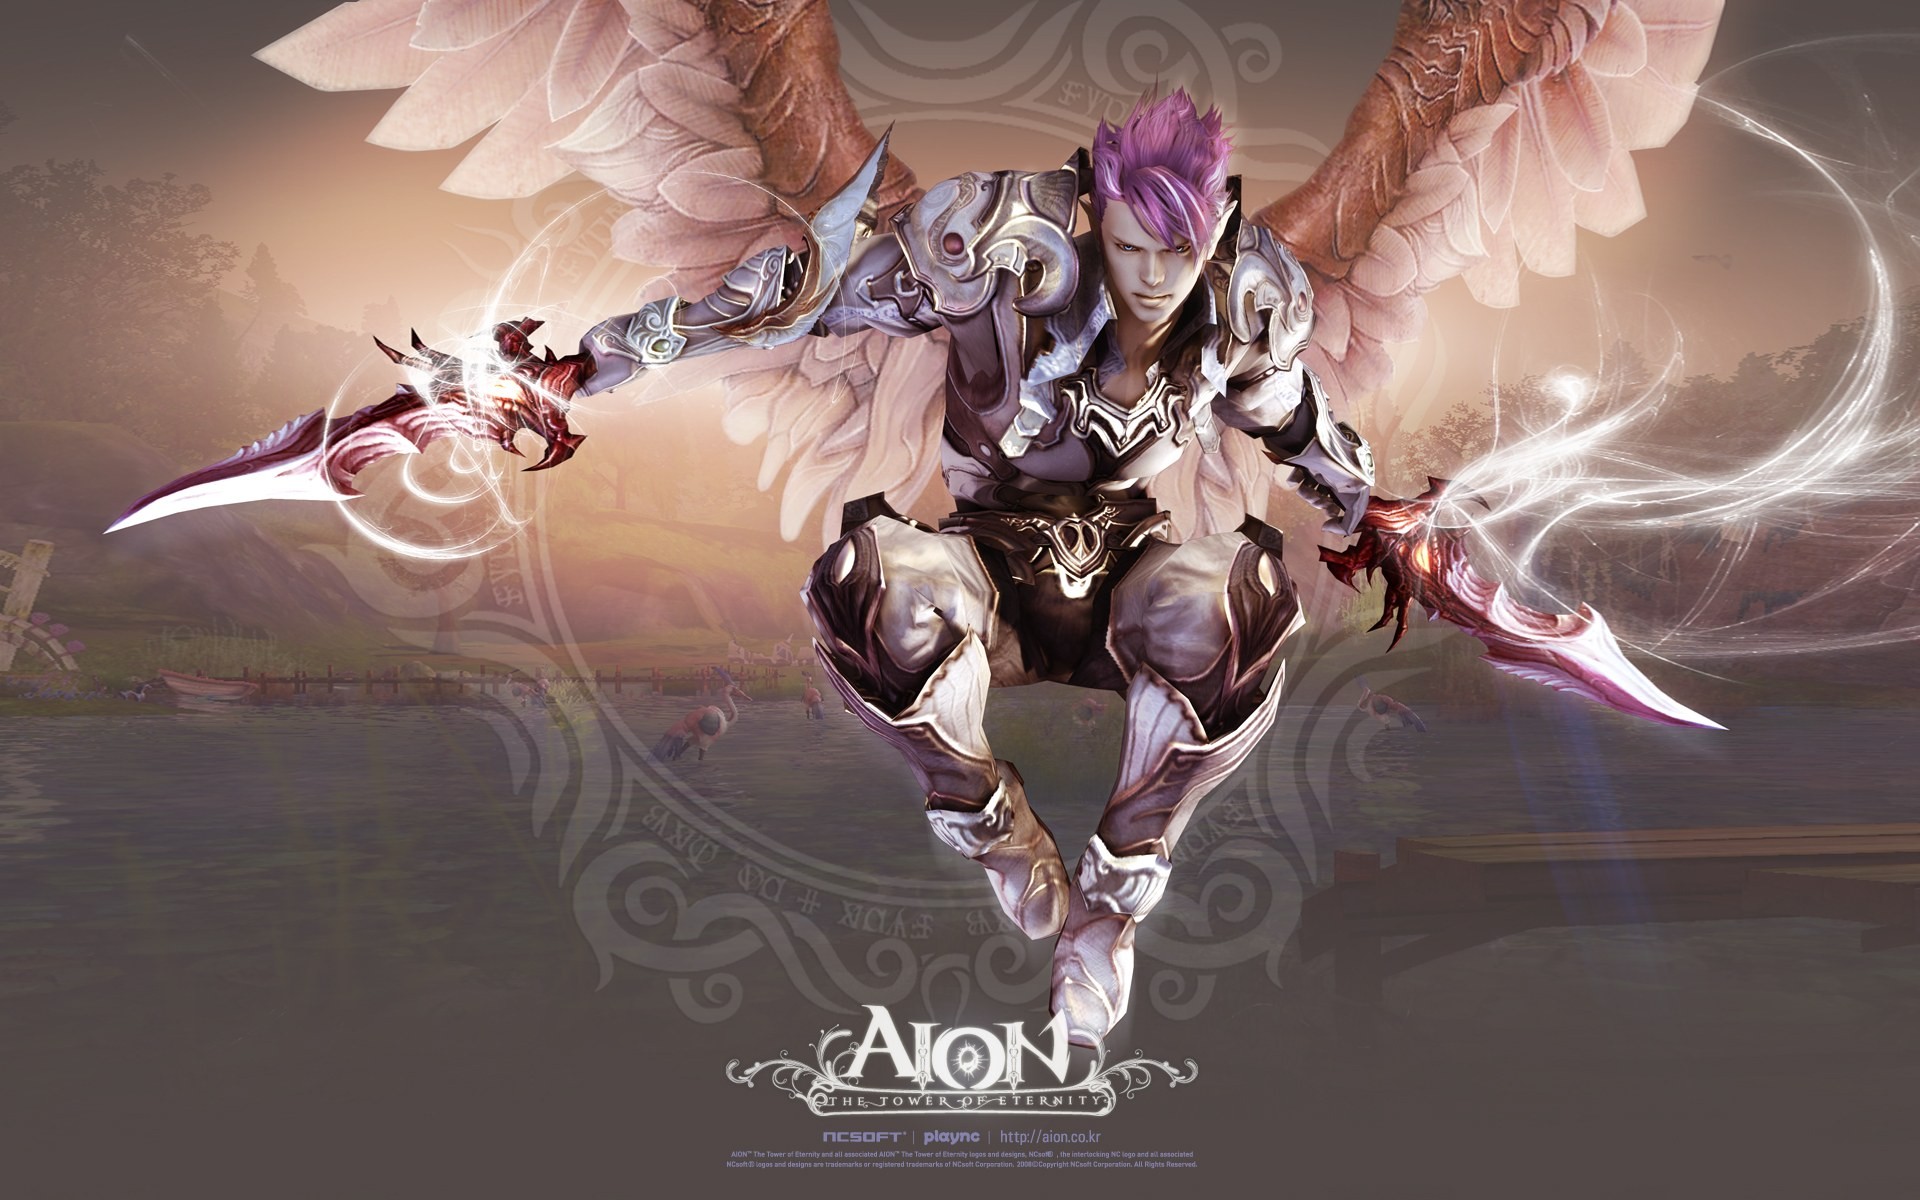 Aion modeling HD gaming wallpapers #14 - 1920x1200